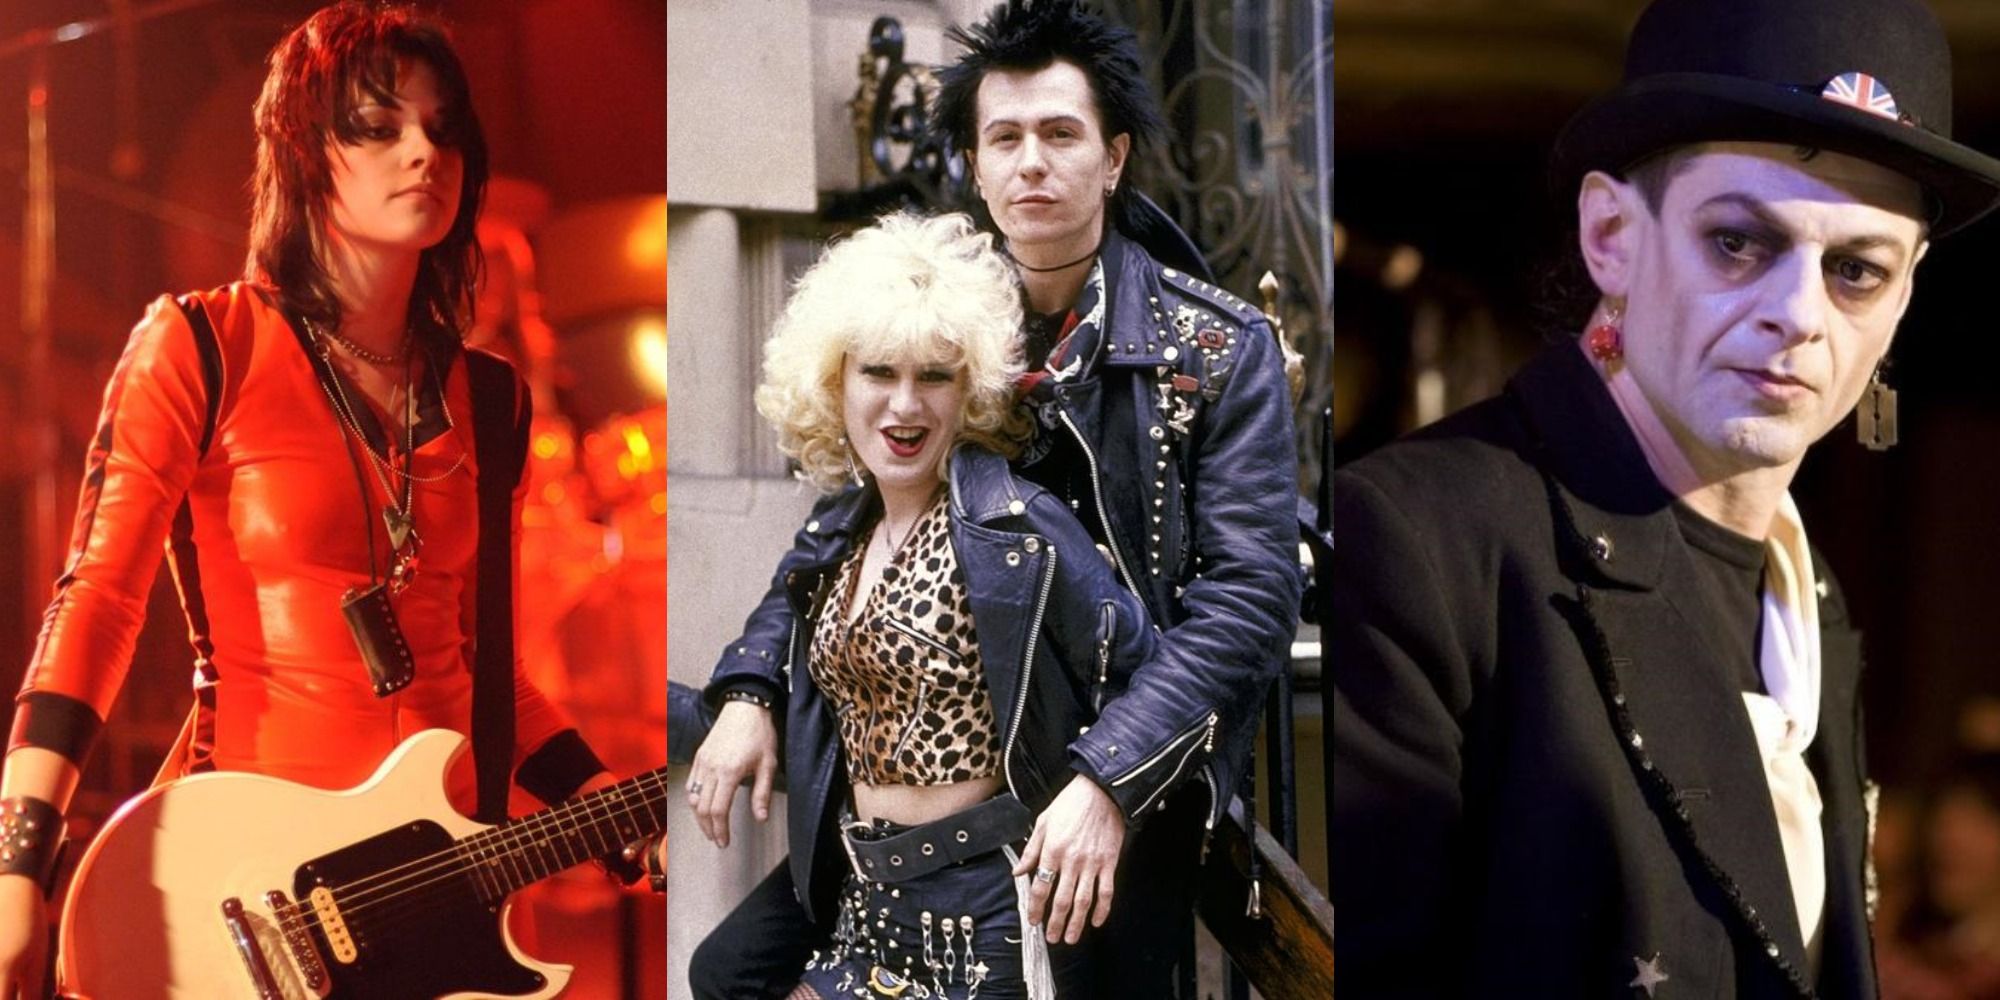 Stills from The Runaways, Sid & Nancy, and Sex & Drugs & Rock & Roll